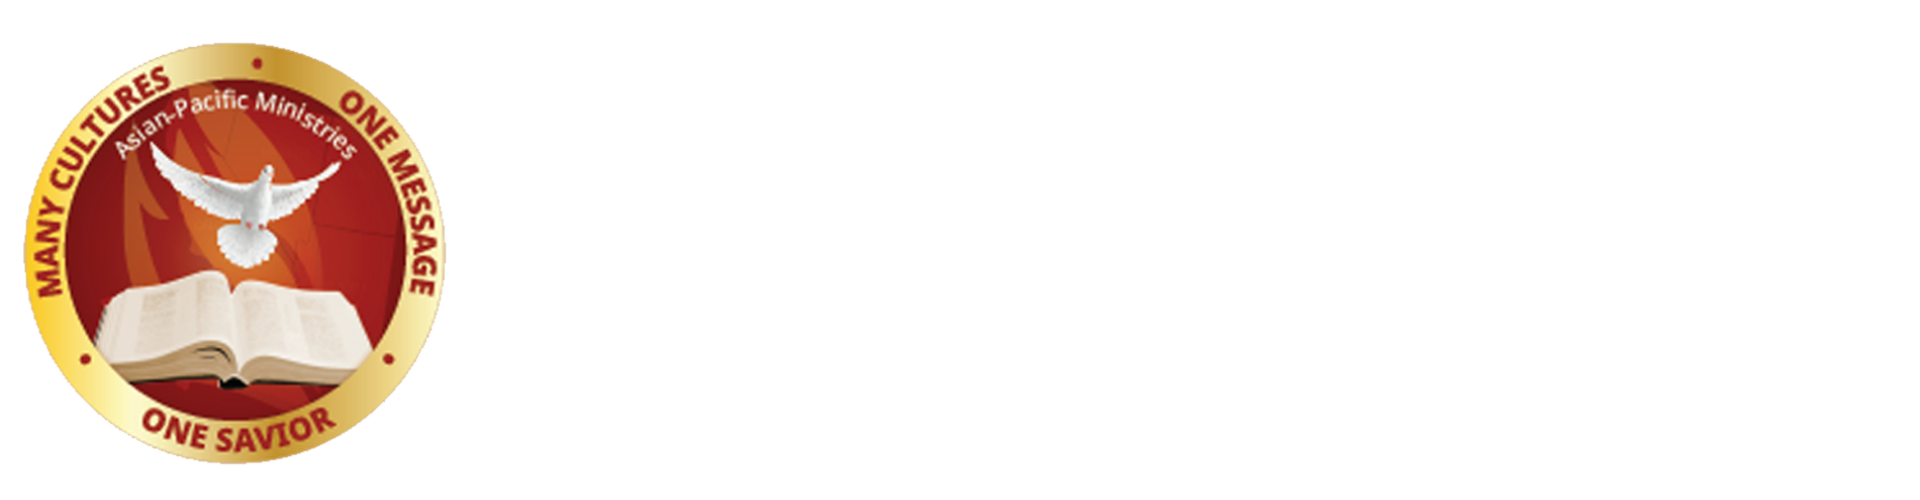 Asian-Pacific Ministries